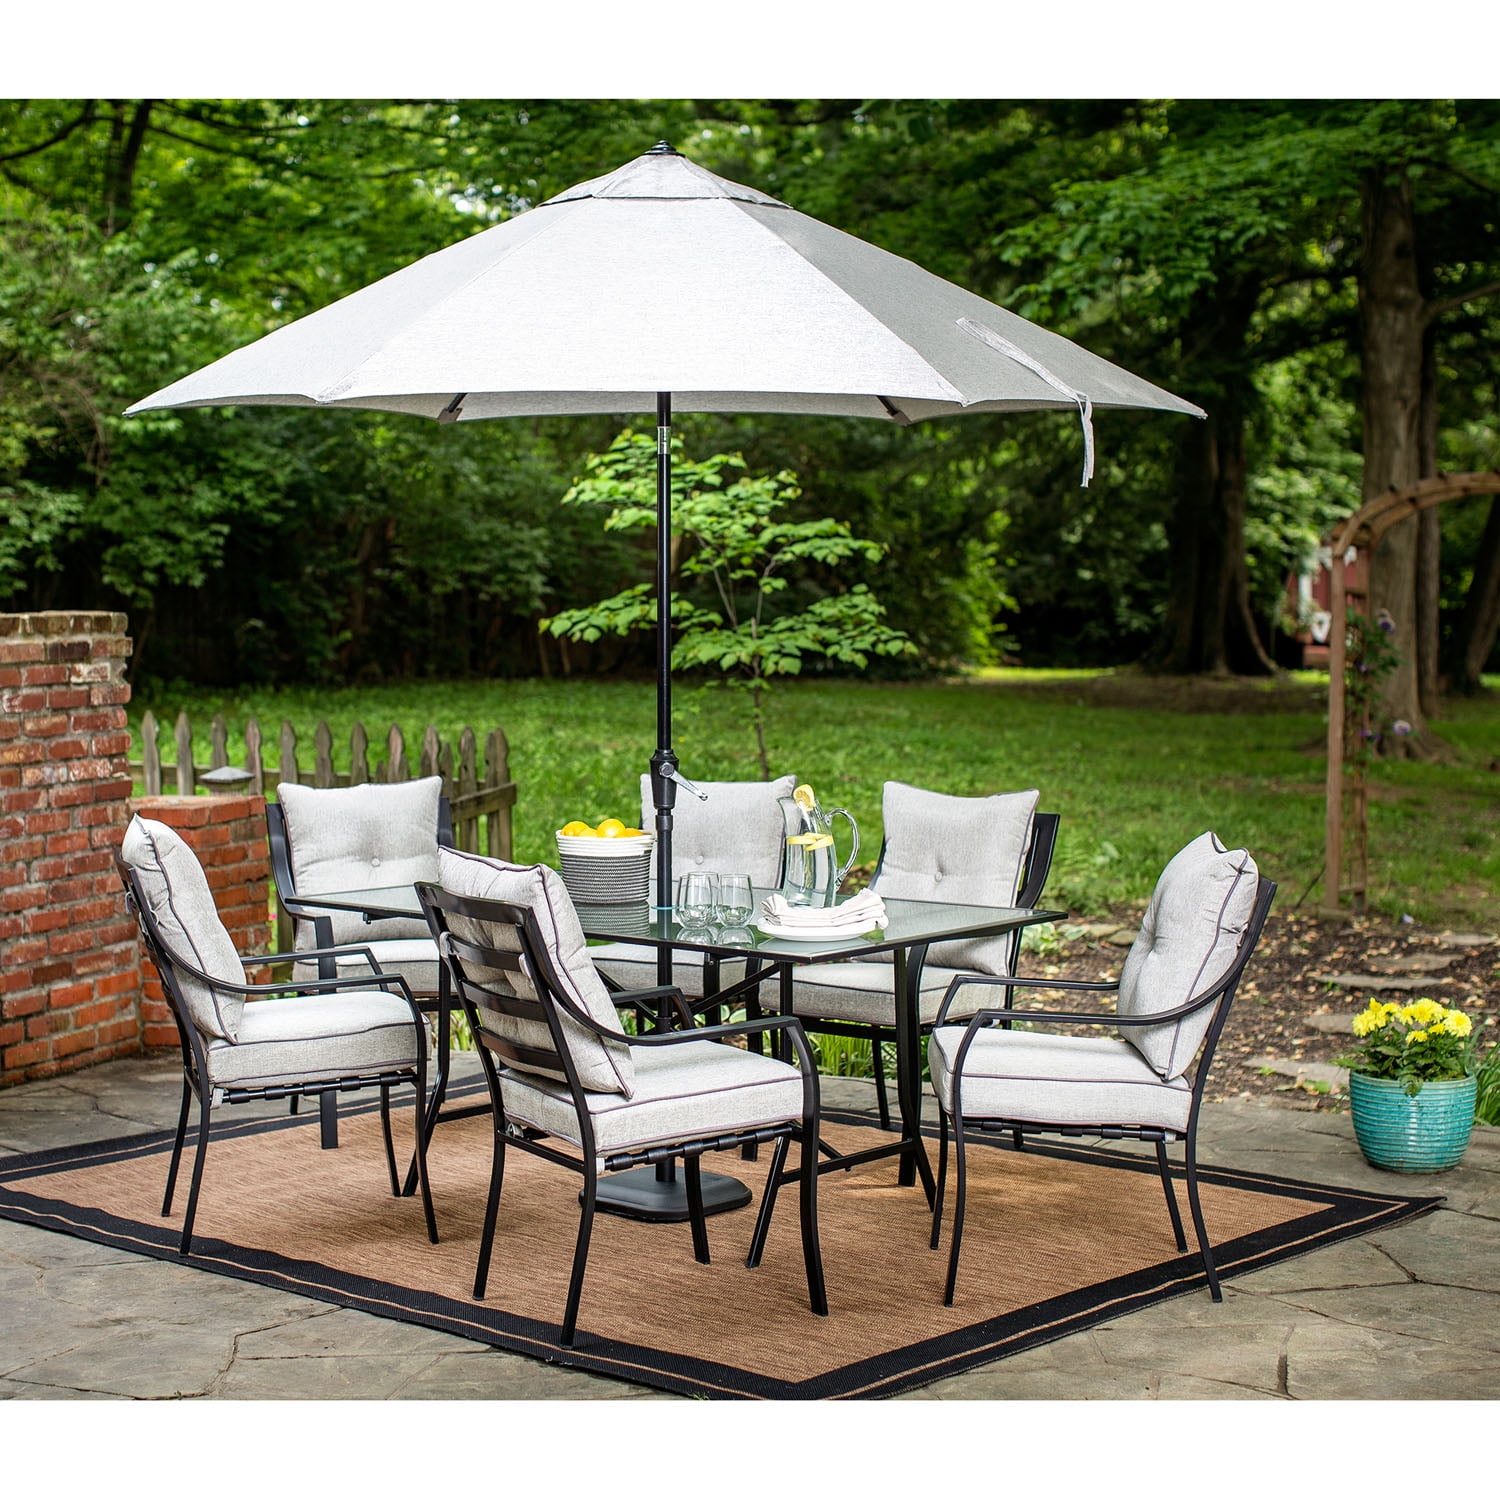 Hanover Lavallette 7-Piece Outdoor Dining Set with Table Umbrella and